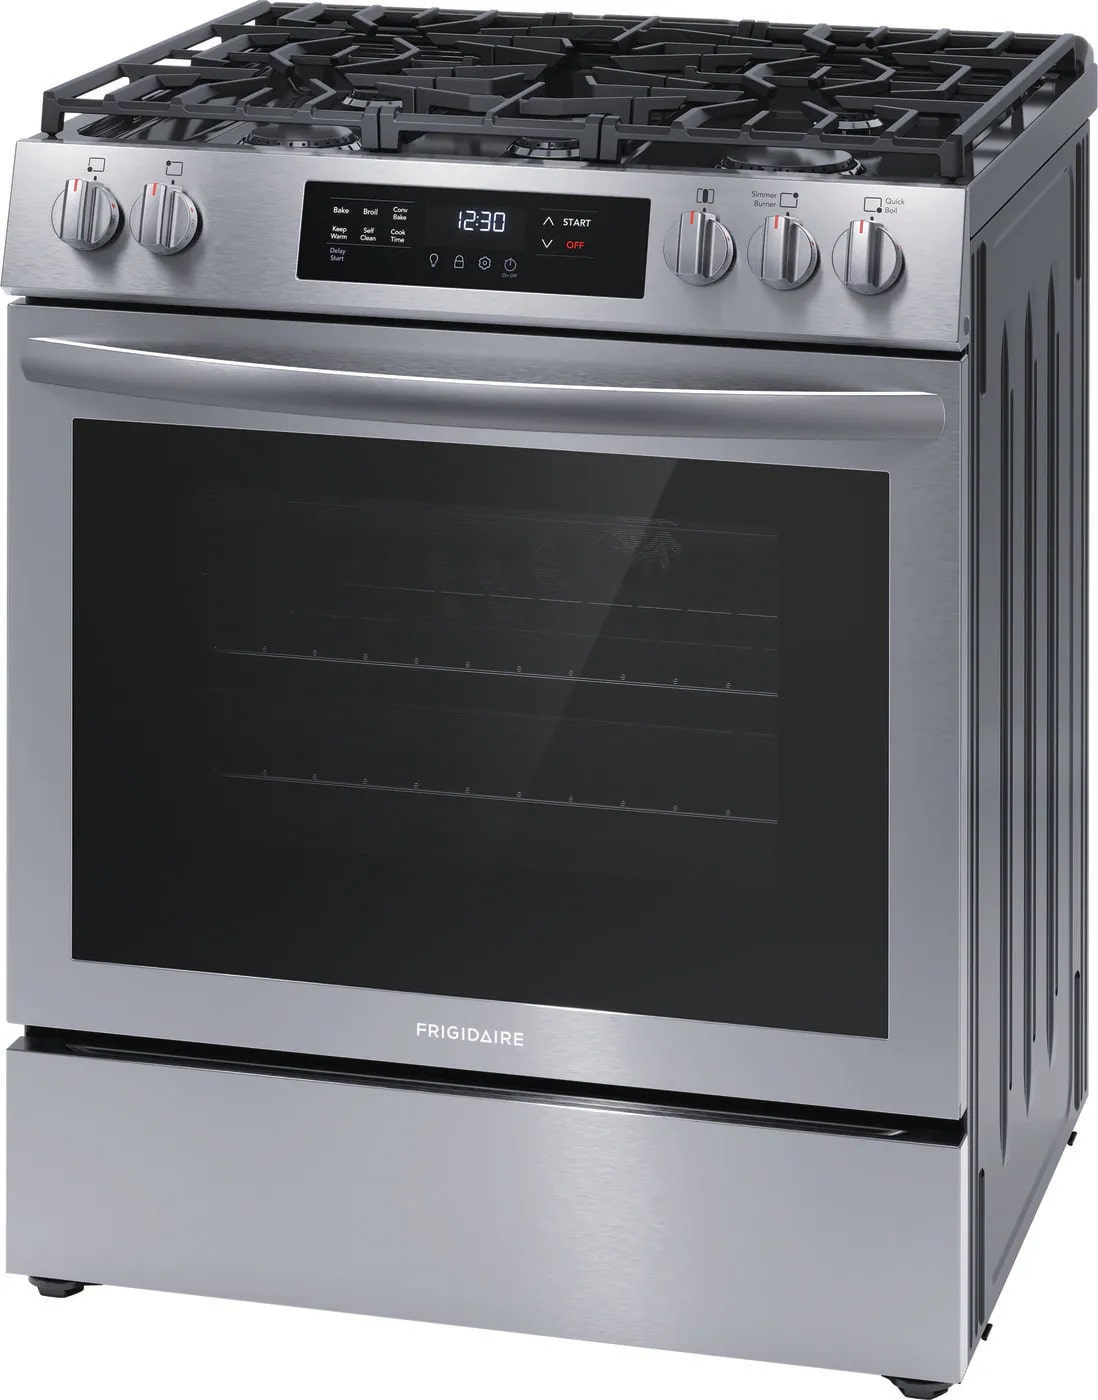 Frigidaire - 5.1 cu. ft  Gas Range in Stainless - FCFG3083AS